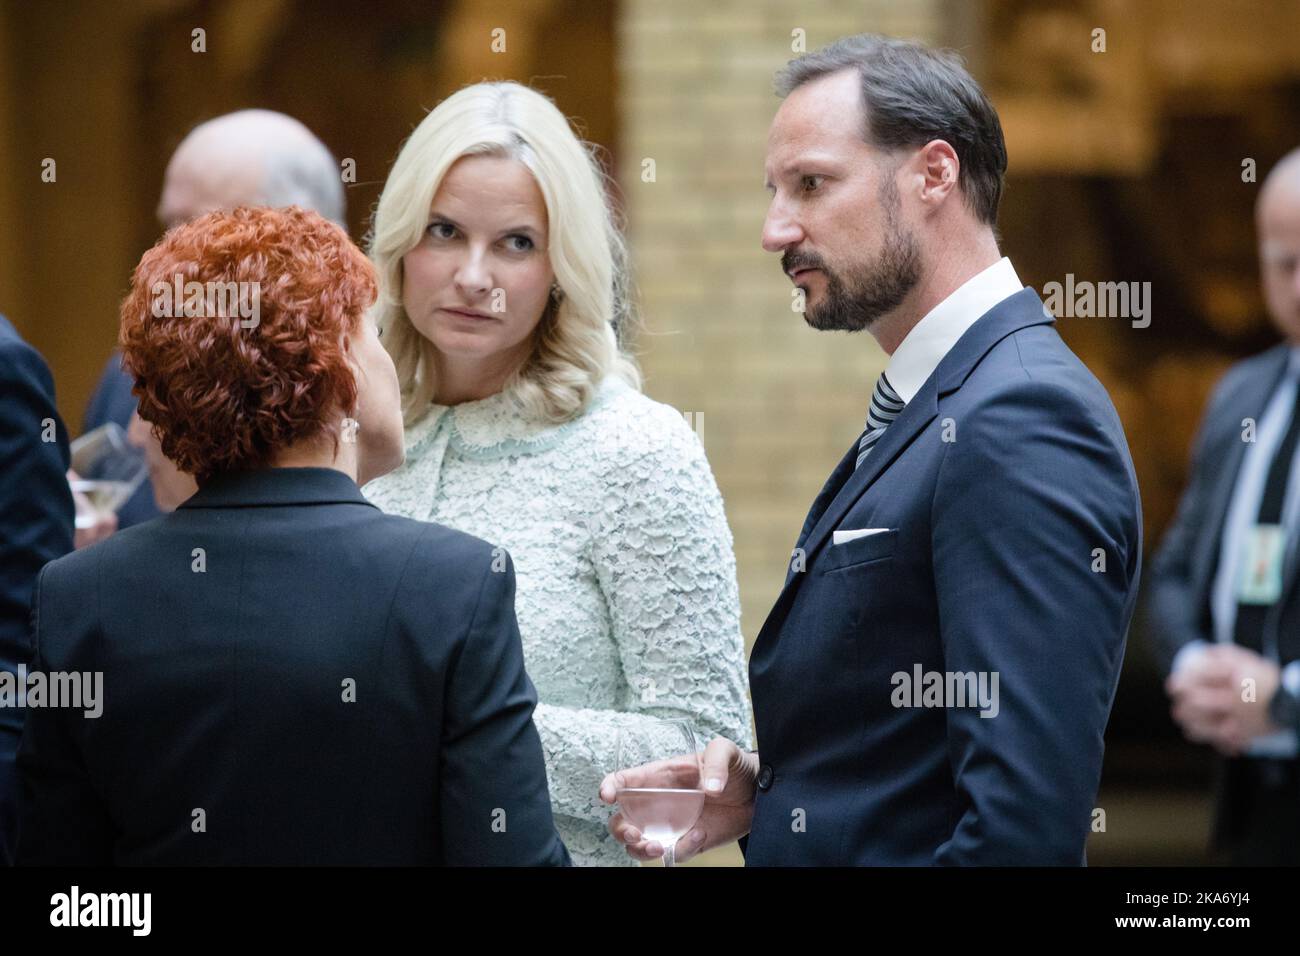 Oslo, Norway 20170918. Crown Princess Mette-Marit and Crown Prince Haakon during the unveiling of the King and Queen's 80th anniversary gift from the Storting (Parliament) on Monday. The gift is a painting by Kira Wager called 'King Olav V's Oath for the Storting'. Photo: Audun Braastad / NTB scanpix Stock Photo